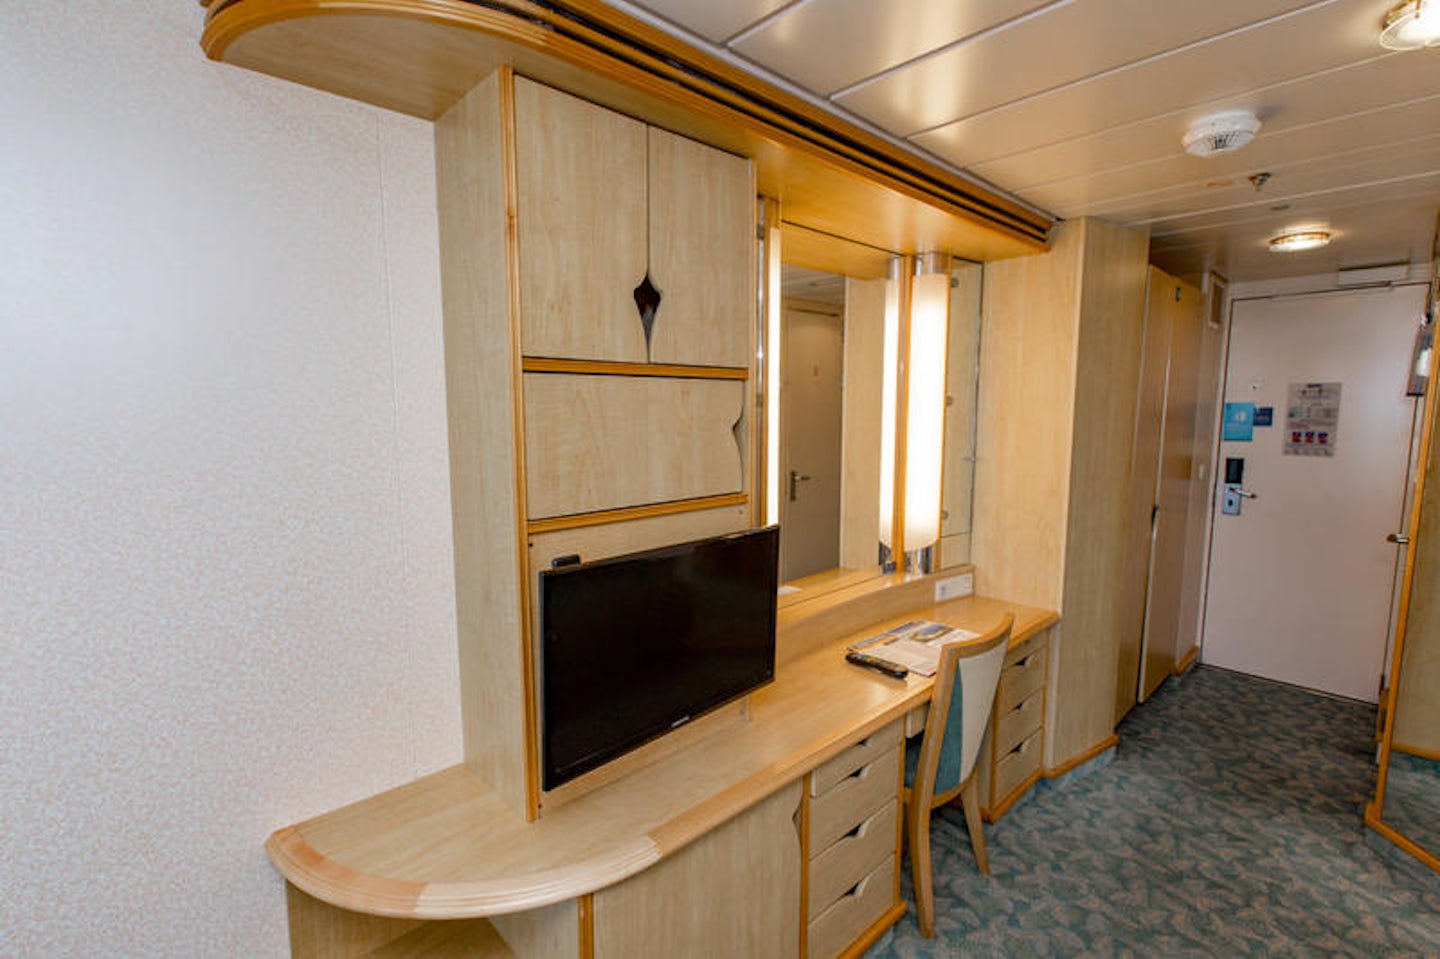 The Spacious Ocean-View Balcony Cabin on Mariner of the Seas